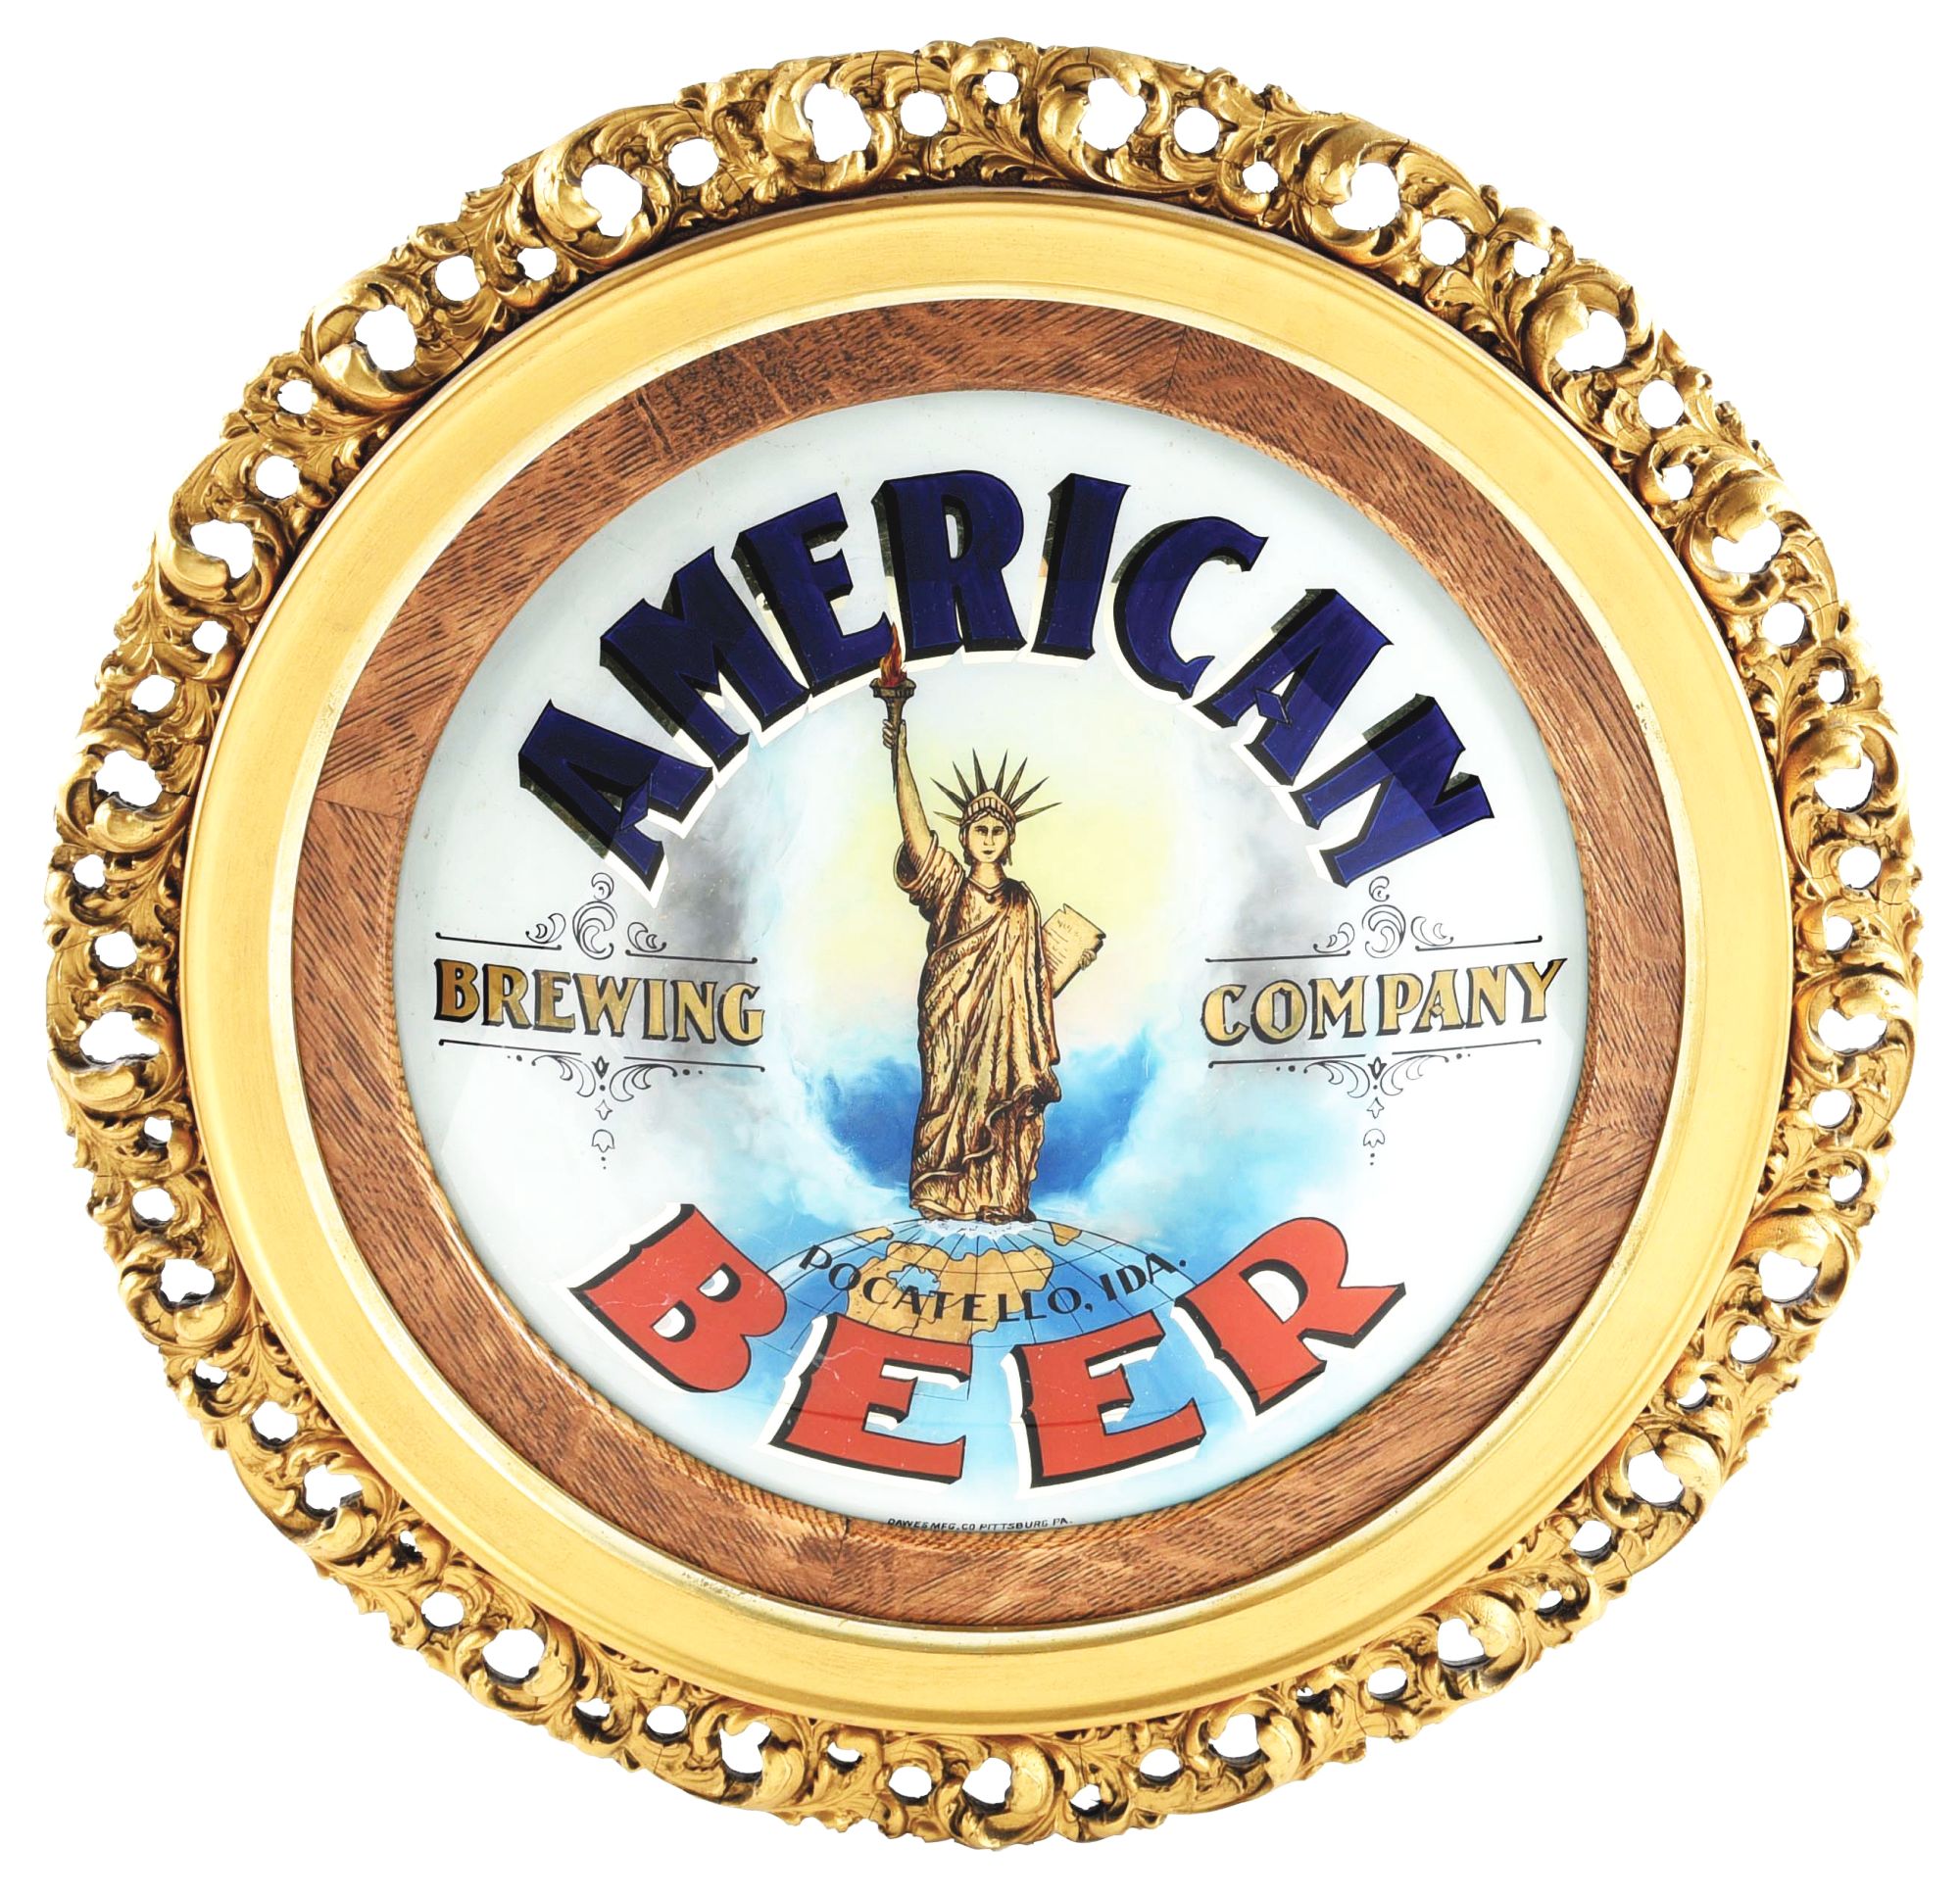 ‘AMERICAN BEER POCATELLO, IDA.,’ ornately framed, rounded glass advertising sign depicting Lady Liberty holding a torch and standing on top of the world. Stamped ‘DAWES MFG. CO PITTSBURG PA.’ Framed size: 26½in diameter. Excellent condition. Estimate $5,000-$10,000